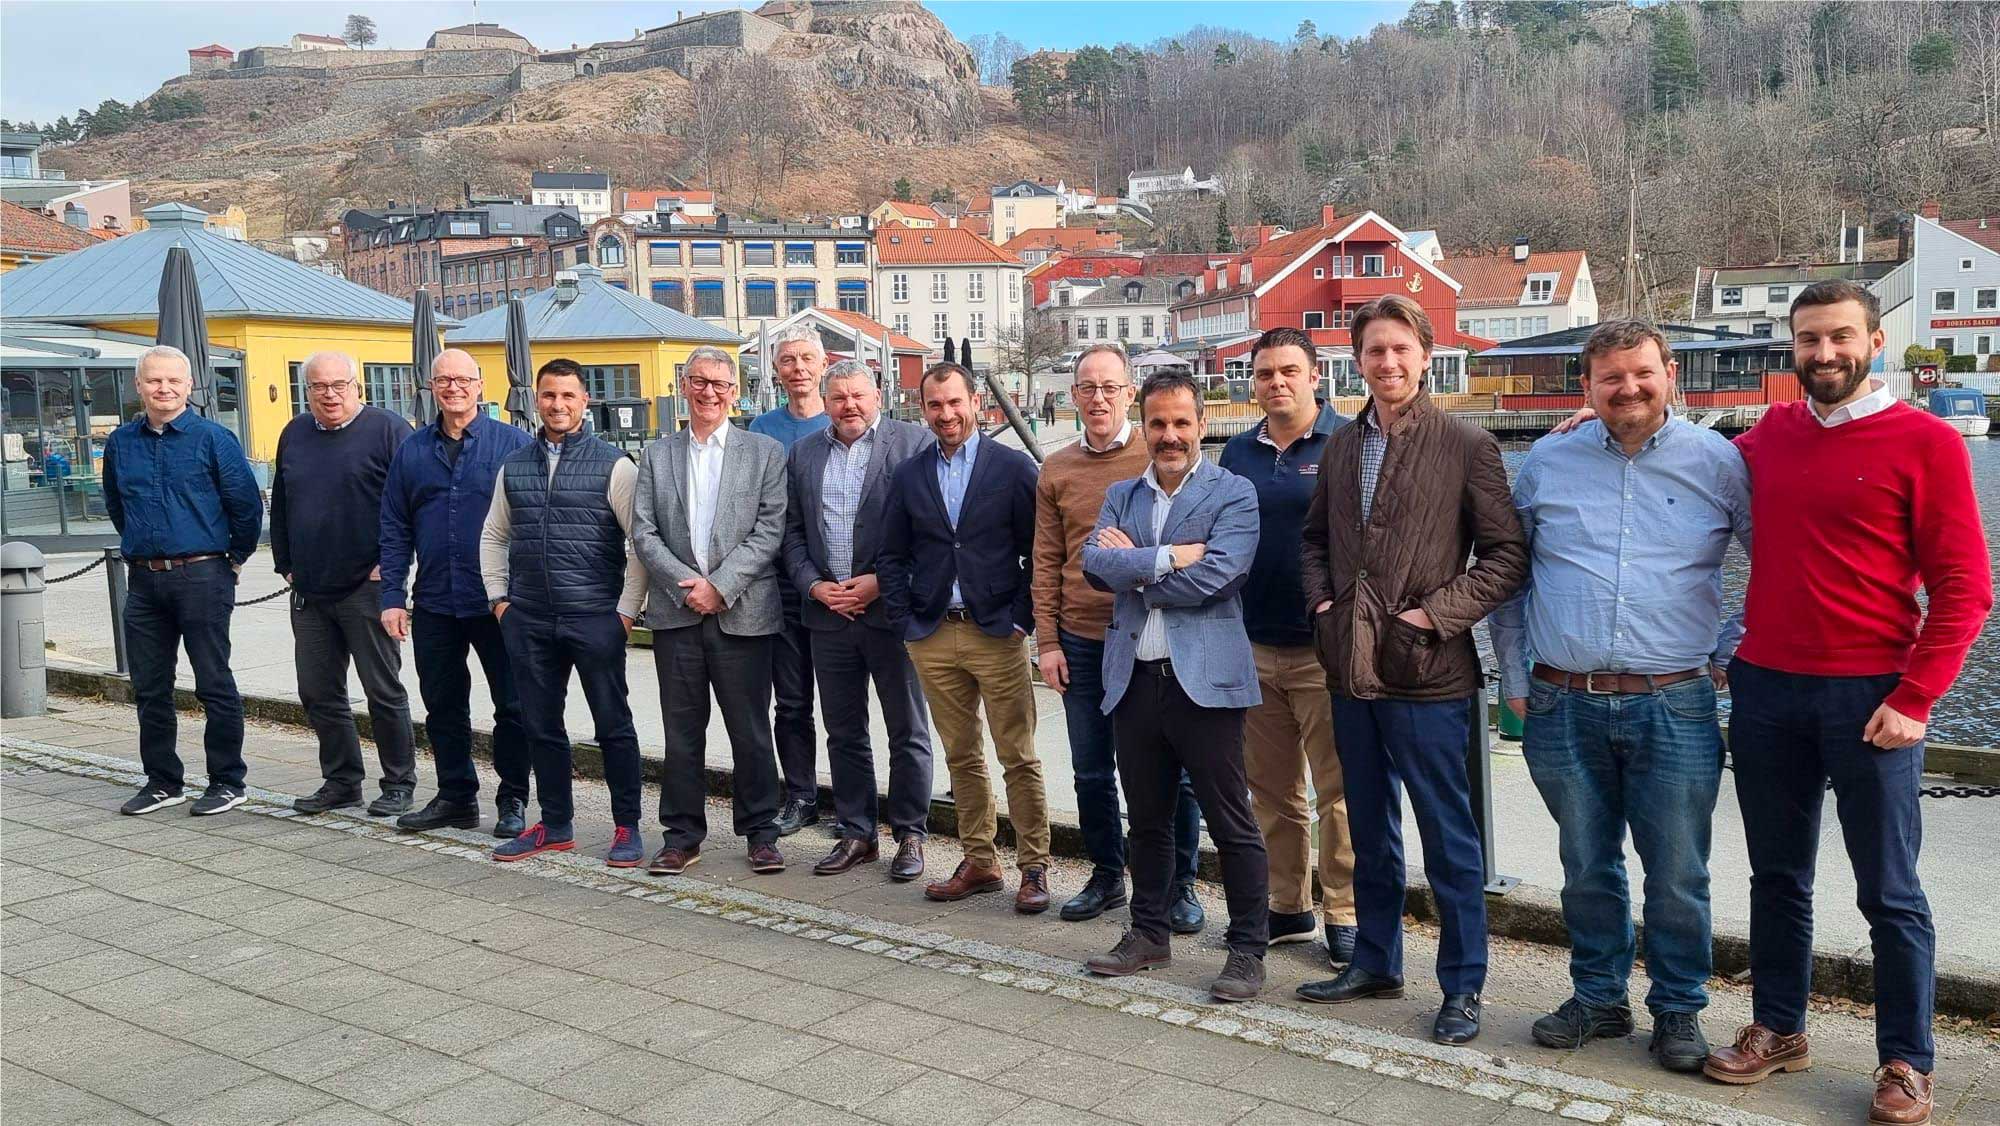 Members of the three companies Catenda (Norway), Ingecid (Spain) and Createc (UK) standing next to each other in norway for decomissioning meeting